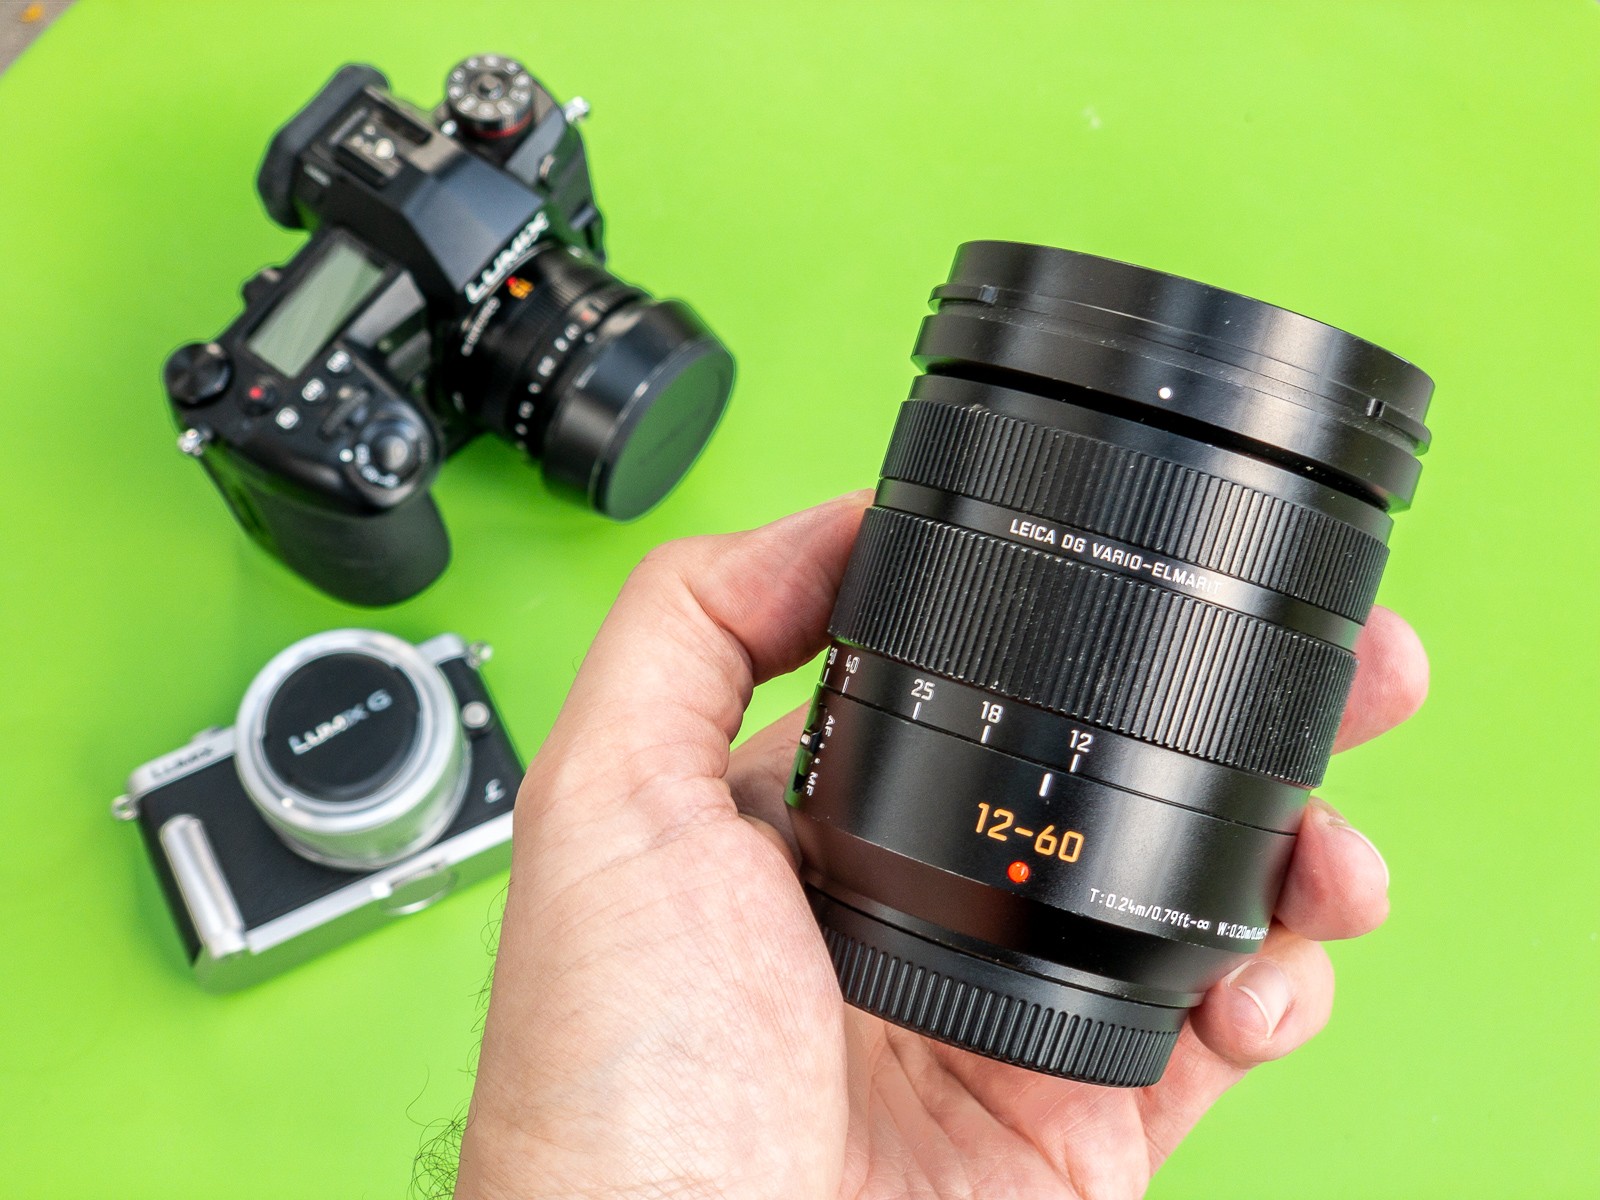 Leica 12-60mm a great versatile lens for micro four-thirds